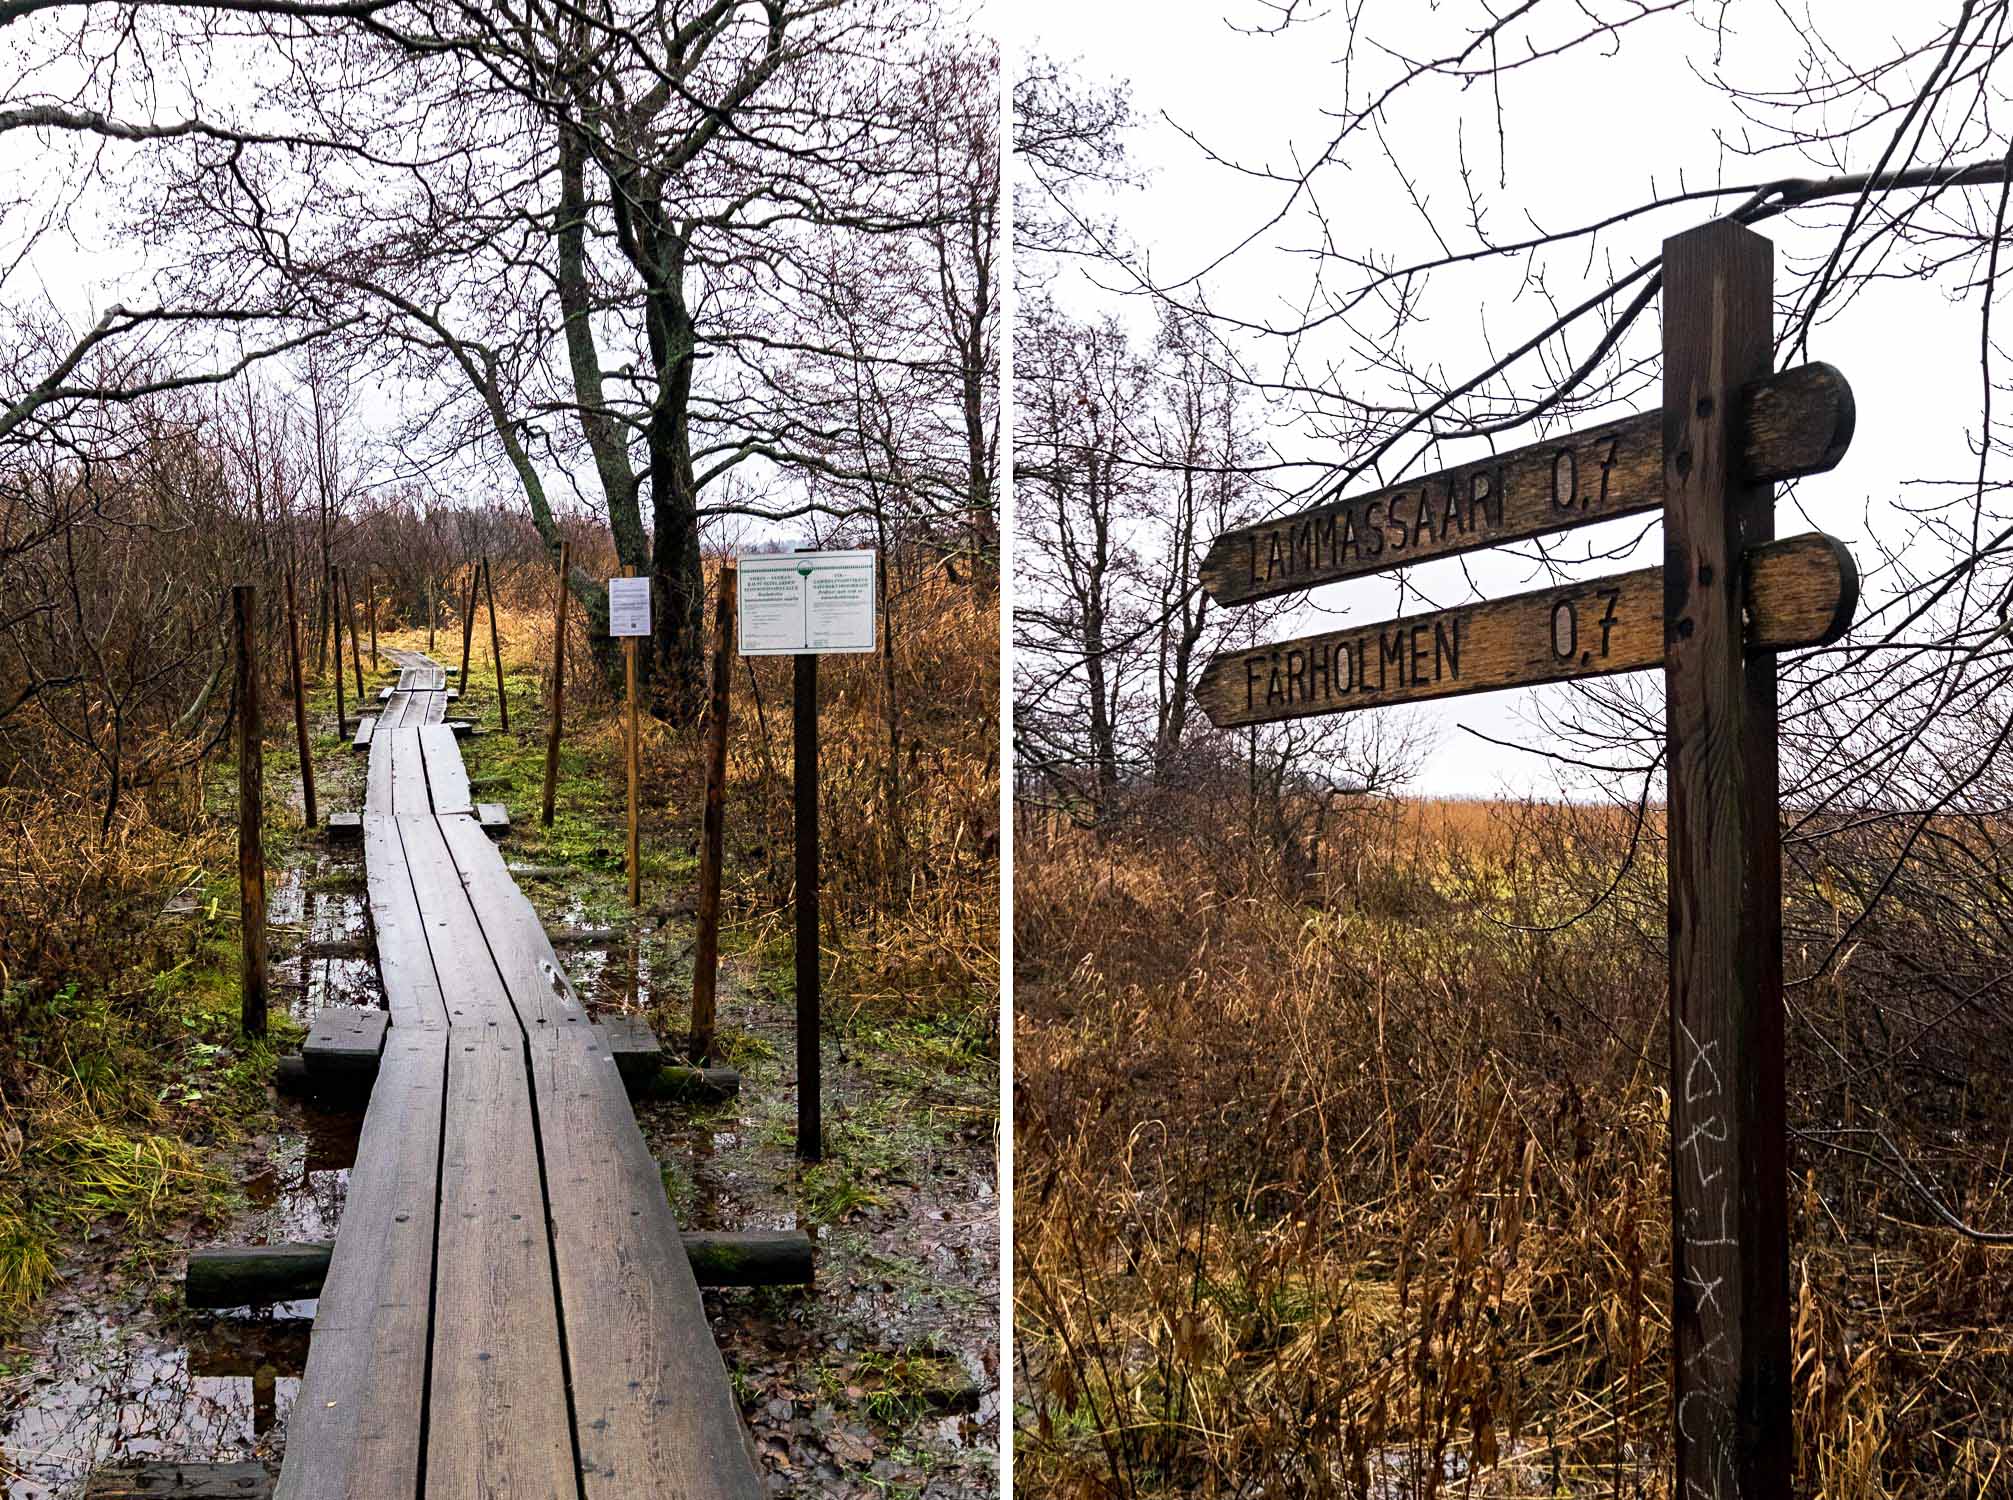 Vanhankaupunginlahti Nature Reserve - Helsinki: A Two-Day City Guide to The Finnish Capital